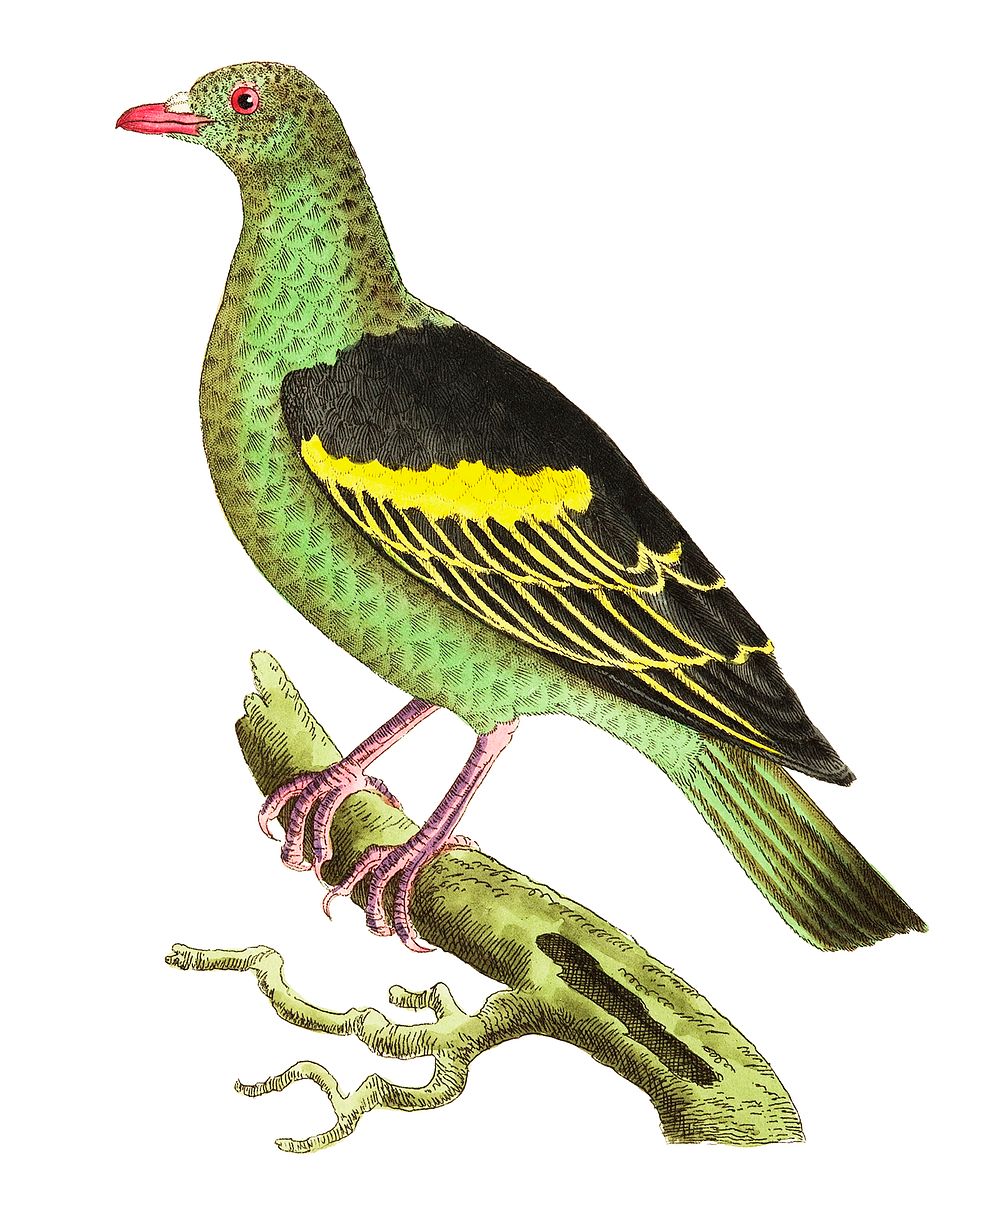 Aromatic Pigeon or Olive-green Pigeon illustration from The Naturalist's Miscellany (1789-1813) by George Shaw (1751-1813)